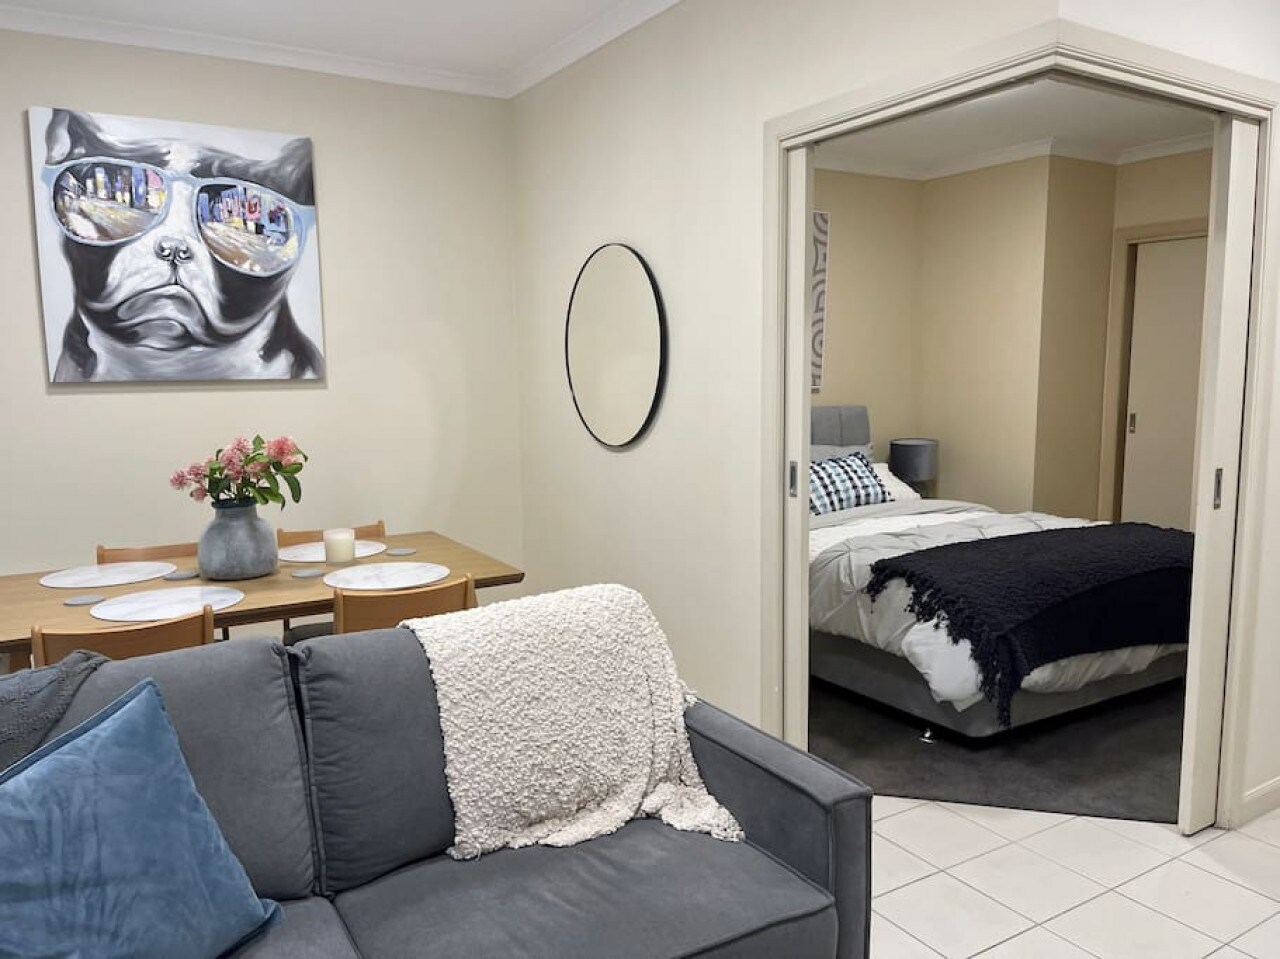 Property Image 1 - Morgan Place    Central Melbourne CBD Apartment on Flinders Lane   Late Check-Out   Complimentary Welcome 